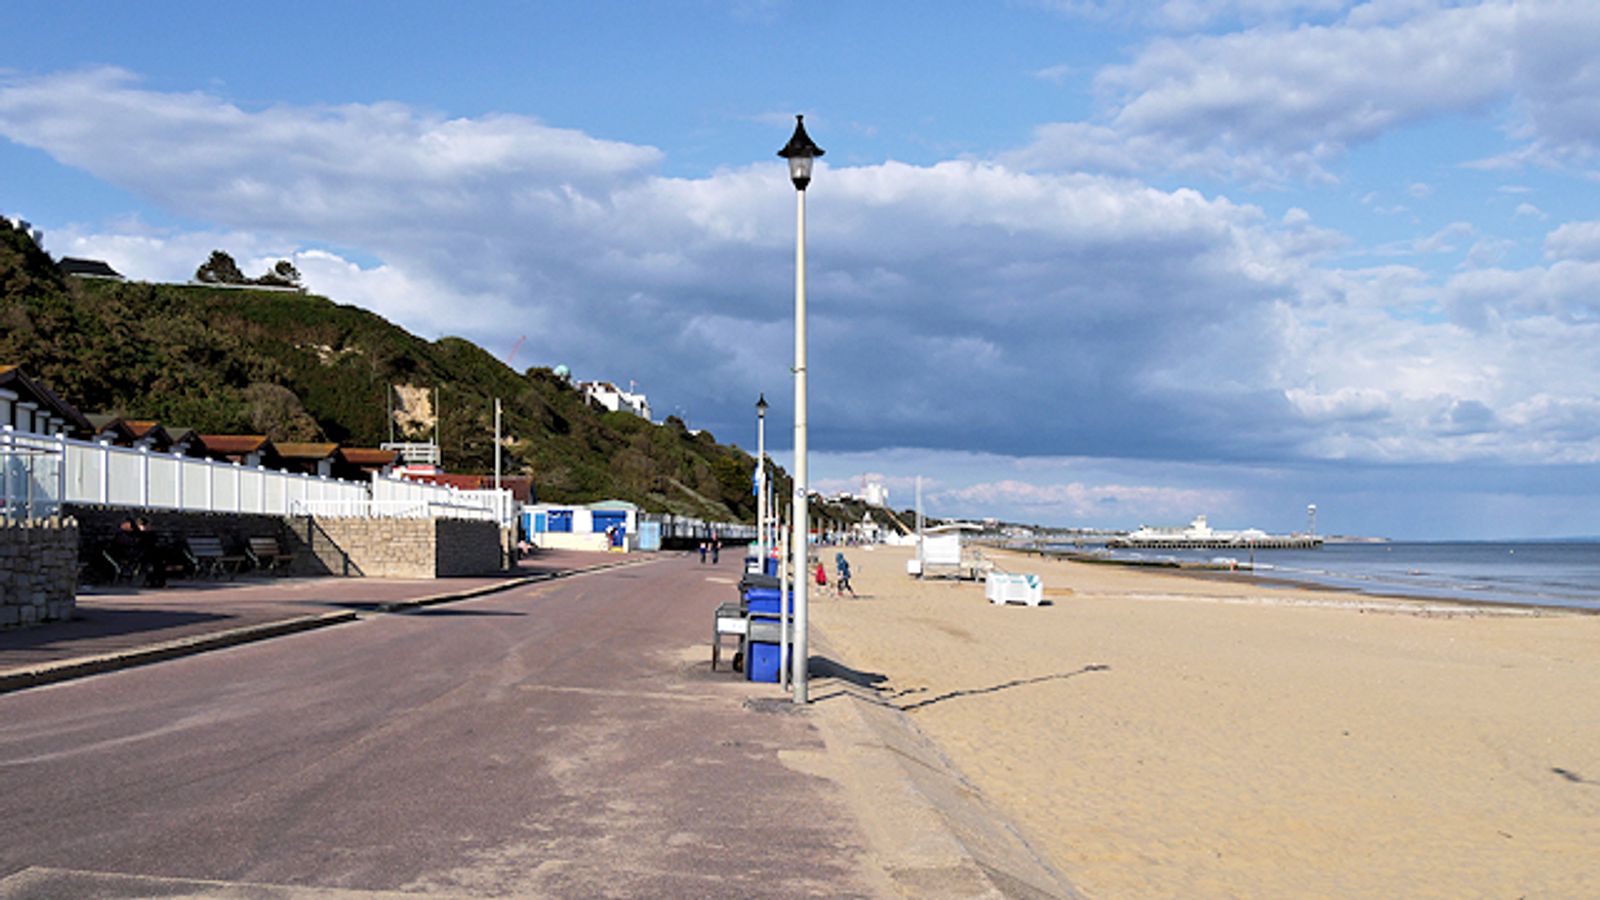 Bournemouth: Boy, 17, arrested on suspicion of murder after woman stabbed to death on beach